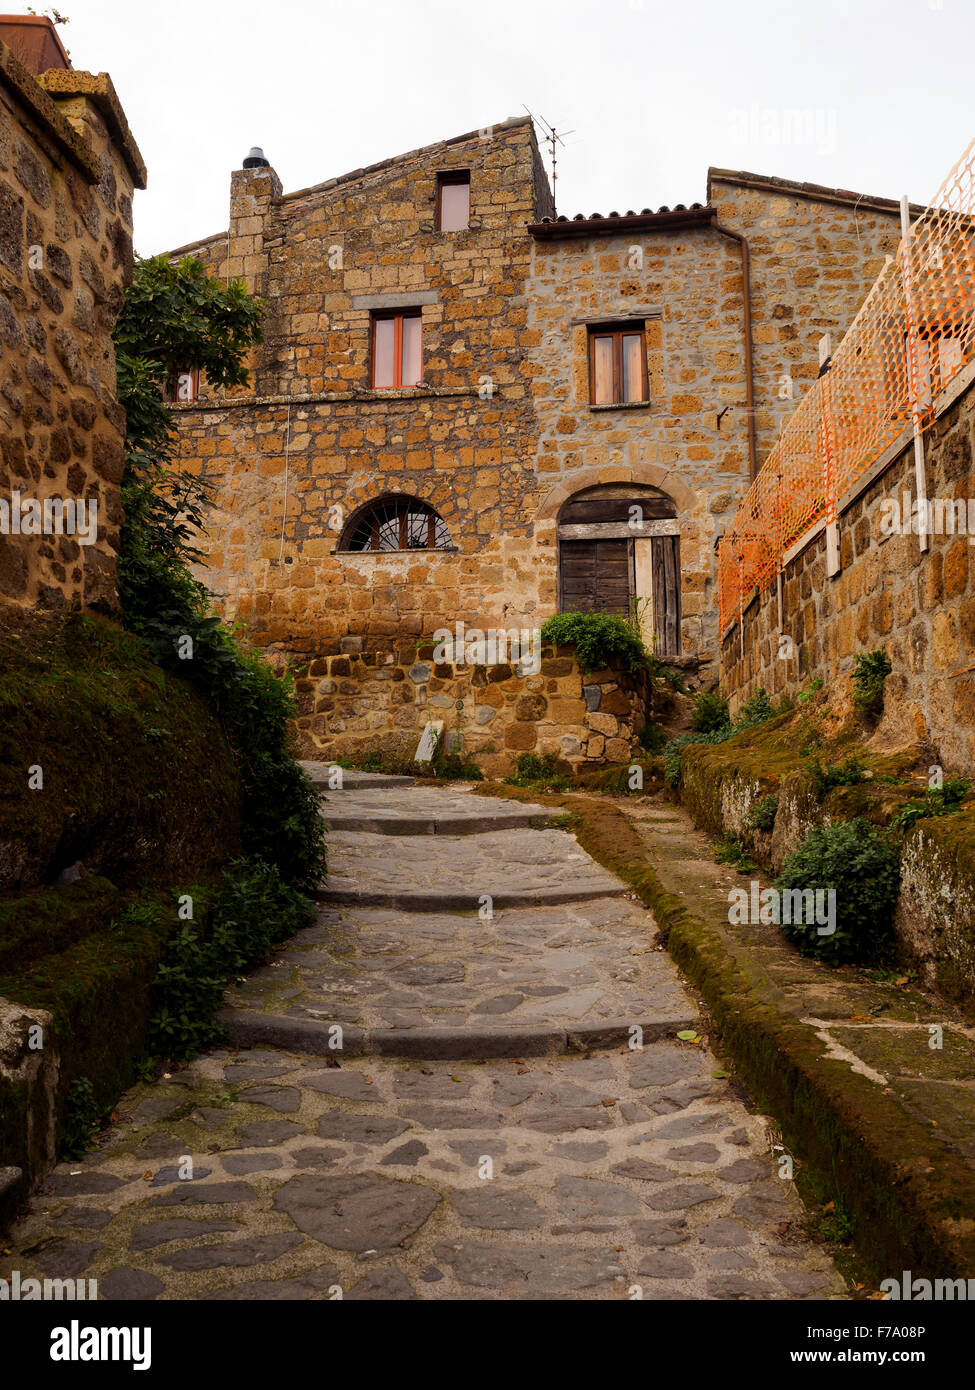 Civita di Bagnoregio 'il paese che muore' ('the town that is dying') built over a plateau of friable volcanic tuff in constant erosion - Viterbo, Italy Stock Photo